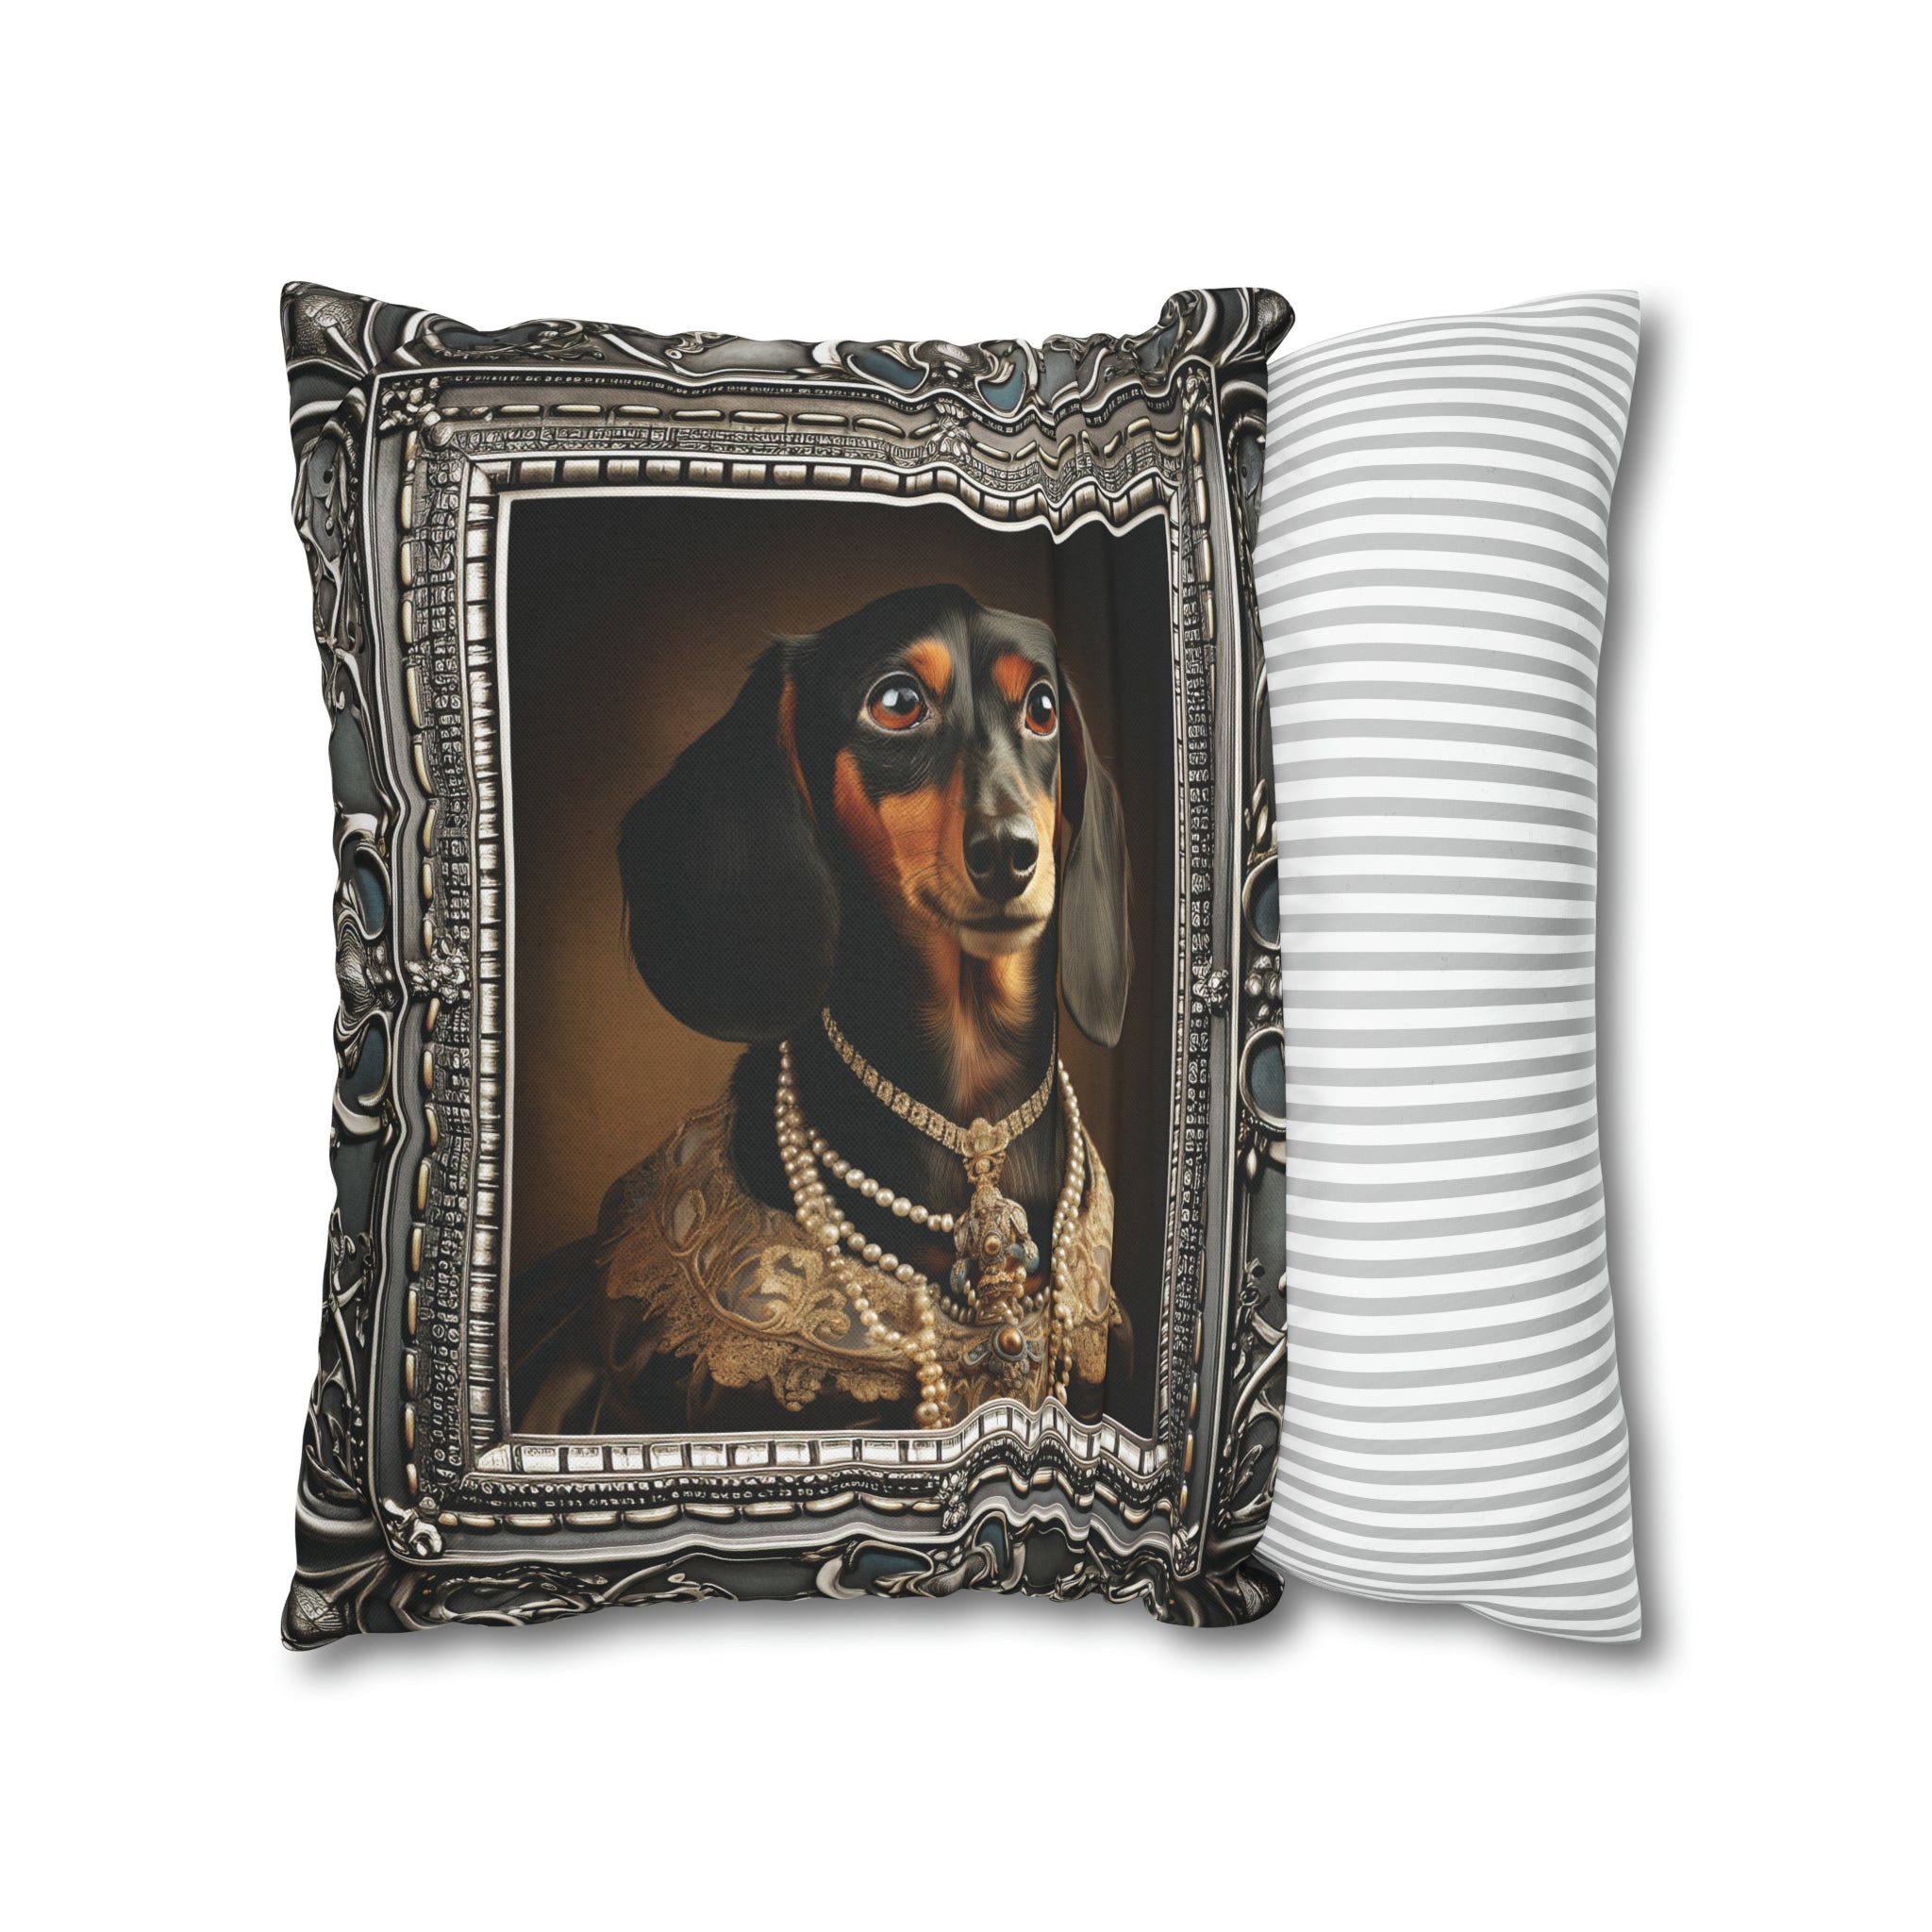 Square Pillow Case 18" x 18", CASE ONLY, no pillow form, original Art ,a Beautiful Painting of a Dachshund in a silver frame.